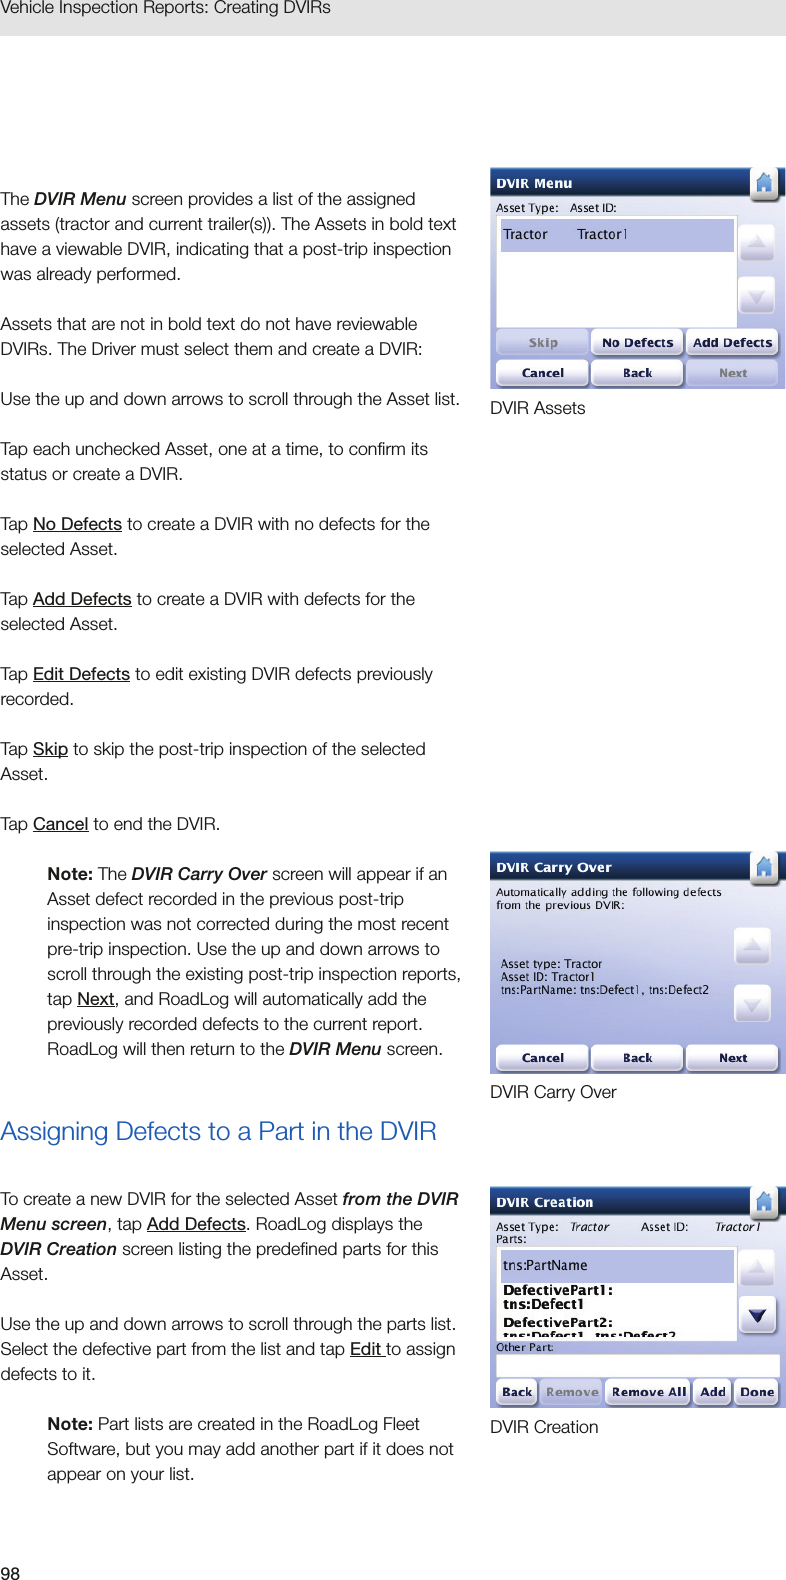 98Vehicle Inspection Reports: Creating DVIRs The DVIR Menu screen provides a list of the assigned assets (tractor and current trailer(s)). The Assets in bold text have a viewable DVIR, indicating that a post-trip inspection was already performed. Assets that are not in bold text do not have reviewable DVIRs. The Driver must select them and create a DVIR:Use the up and down arrows to scroll through the Asset list.Tap each unchecked Asset, one at a time, to confirm its status or create a DVIR.Tap No Defects to create a DVIR with no defects for the selected Asset.Tap Add Defects to create a DVIR with defects for the selected Asset.Tap Edit Defects to edit existing DVIR defects previously recorded.Tap Skip to skip the post-trip inspection of the selected Asset.Tap Cancel to end the DVIR.Note: The DVIR Carry Over screen will appear if an Asset defect recorded in the previous post-trip inspection was not corrected during the most recent pre-trip inspection. Use the up and down arrows to scroll through the existing post-trip inspection reports, tap Next, and RoadLog will automatically add the previously recorded defects to the current report. RoadLog will then return to the DVIR Menu screen.Assigning Defects to a Part in the DVIRTo create a new DVIR for the selected Asset from the DVIR Menu screen, tap Add Defects. RoadLog displays the DVIR Creation screen listing the predefined parts for this Asset.Use the up and down arrows to scroll through the parts list. Select the defective part from the list and tap Edit to assign defects to it. Note: Part lists are created in the RoadLog Fleet Software, but you may add another part if it does not appear on your list. DVIR Carry OverDVIR CreationDVIR Assets